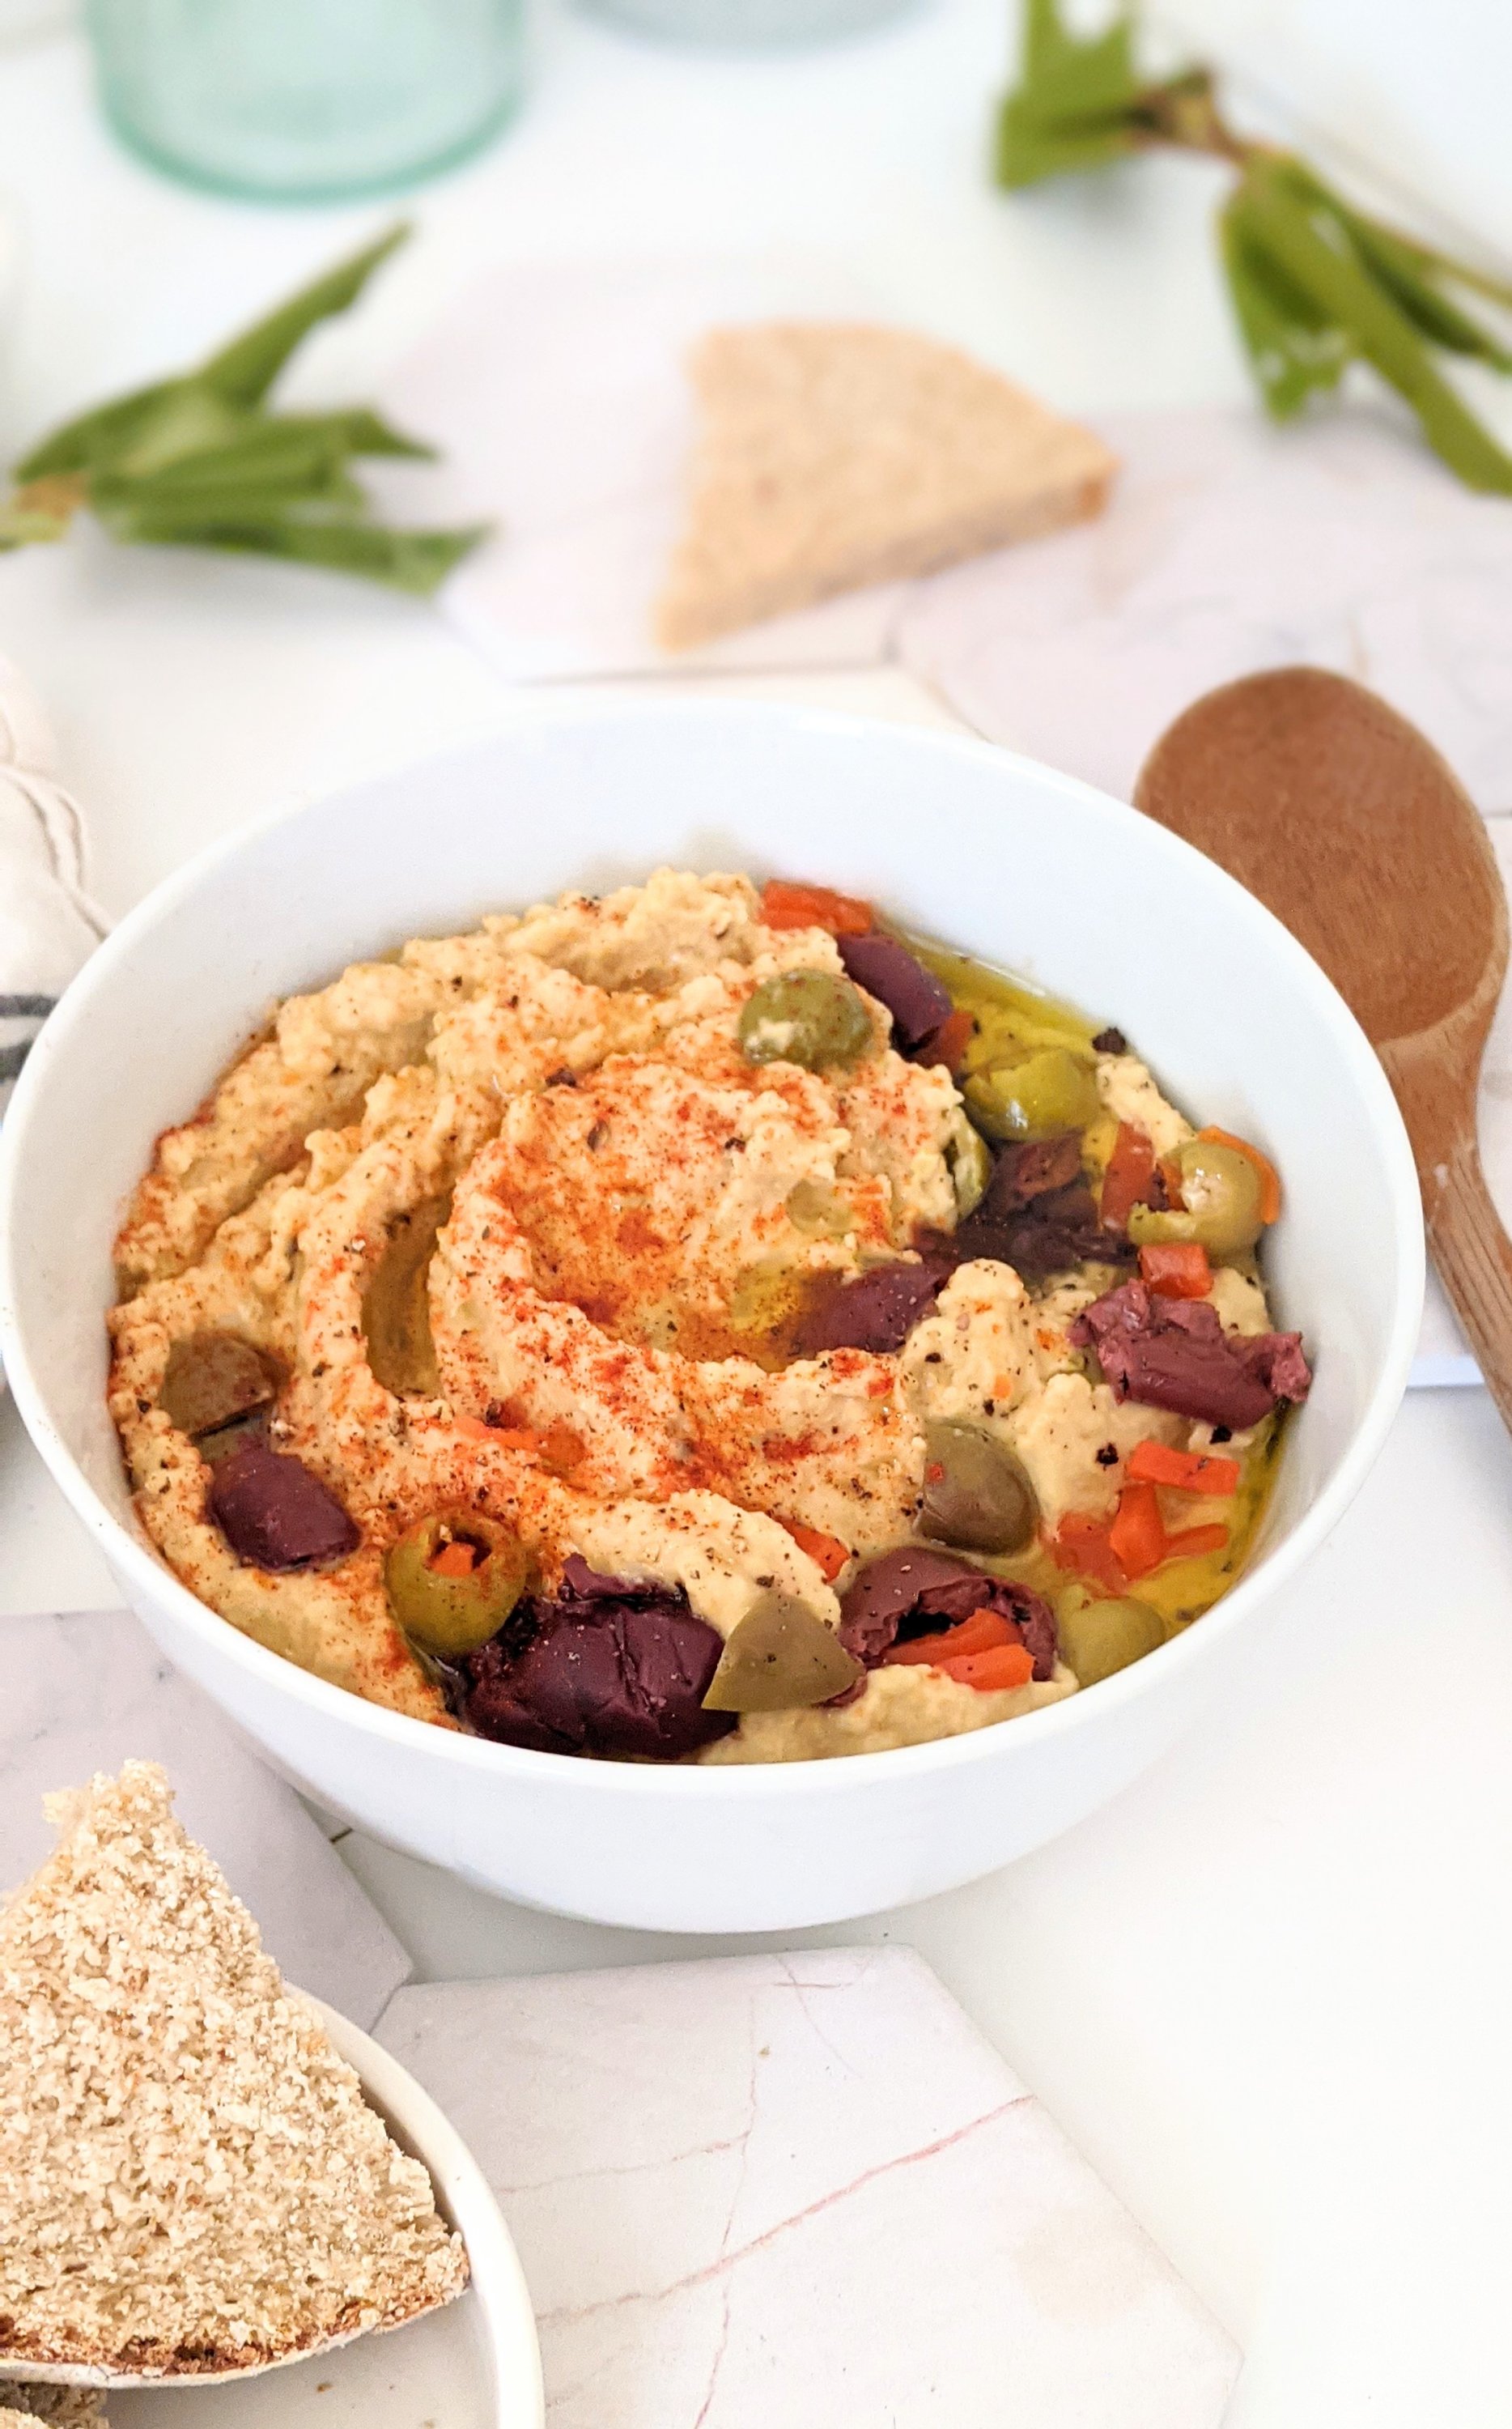 hummus without tahini recipes with olives kalamata olives and green olives and olive oil hummus with bold bright flavor vegan vegetarian gluten free party dips